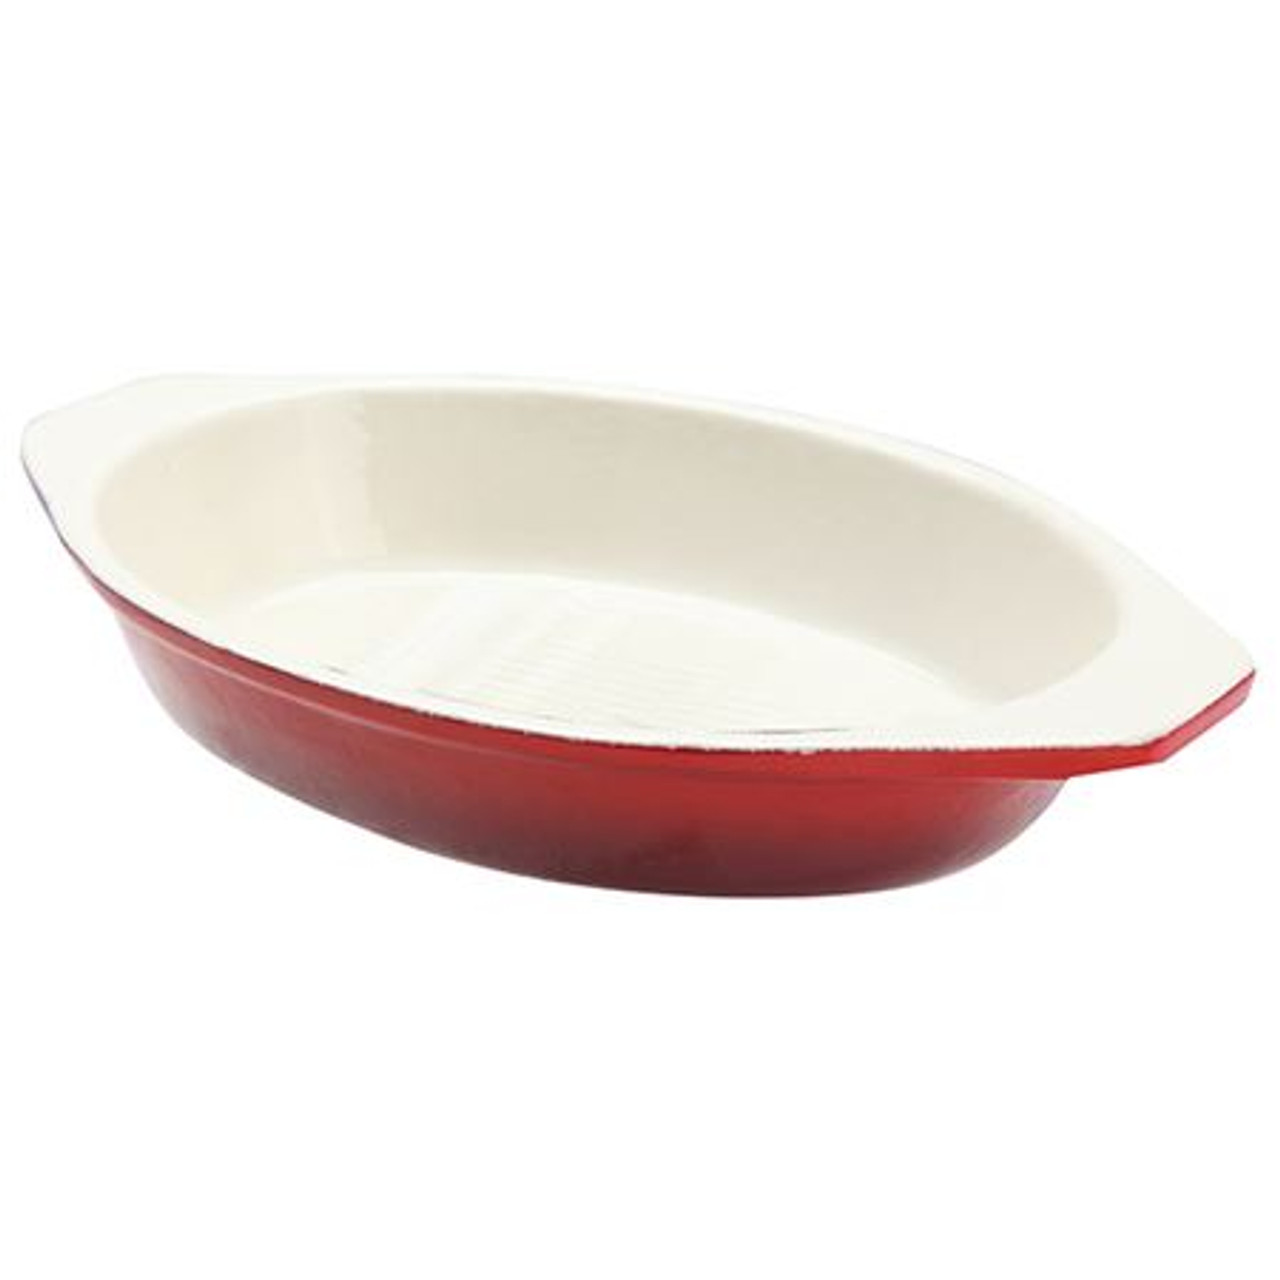 Red Cast Iron Oval Dish 20cm 0.65ltr